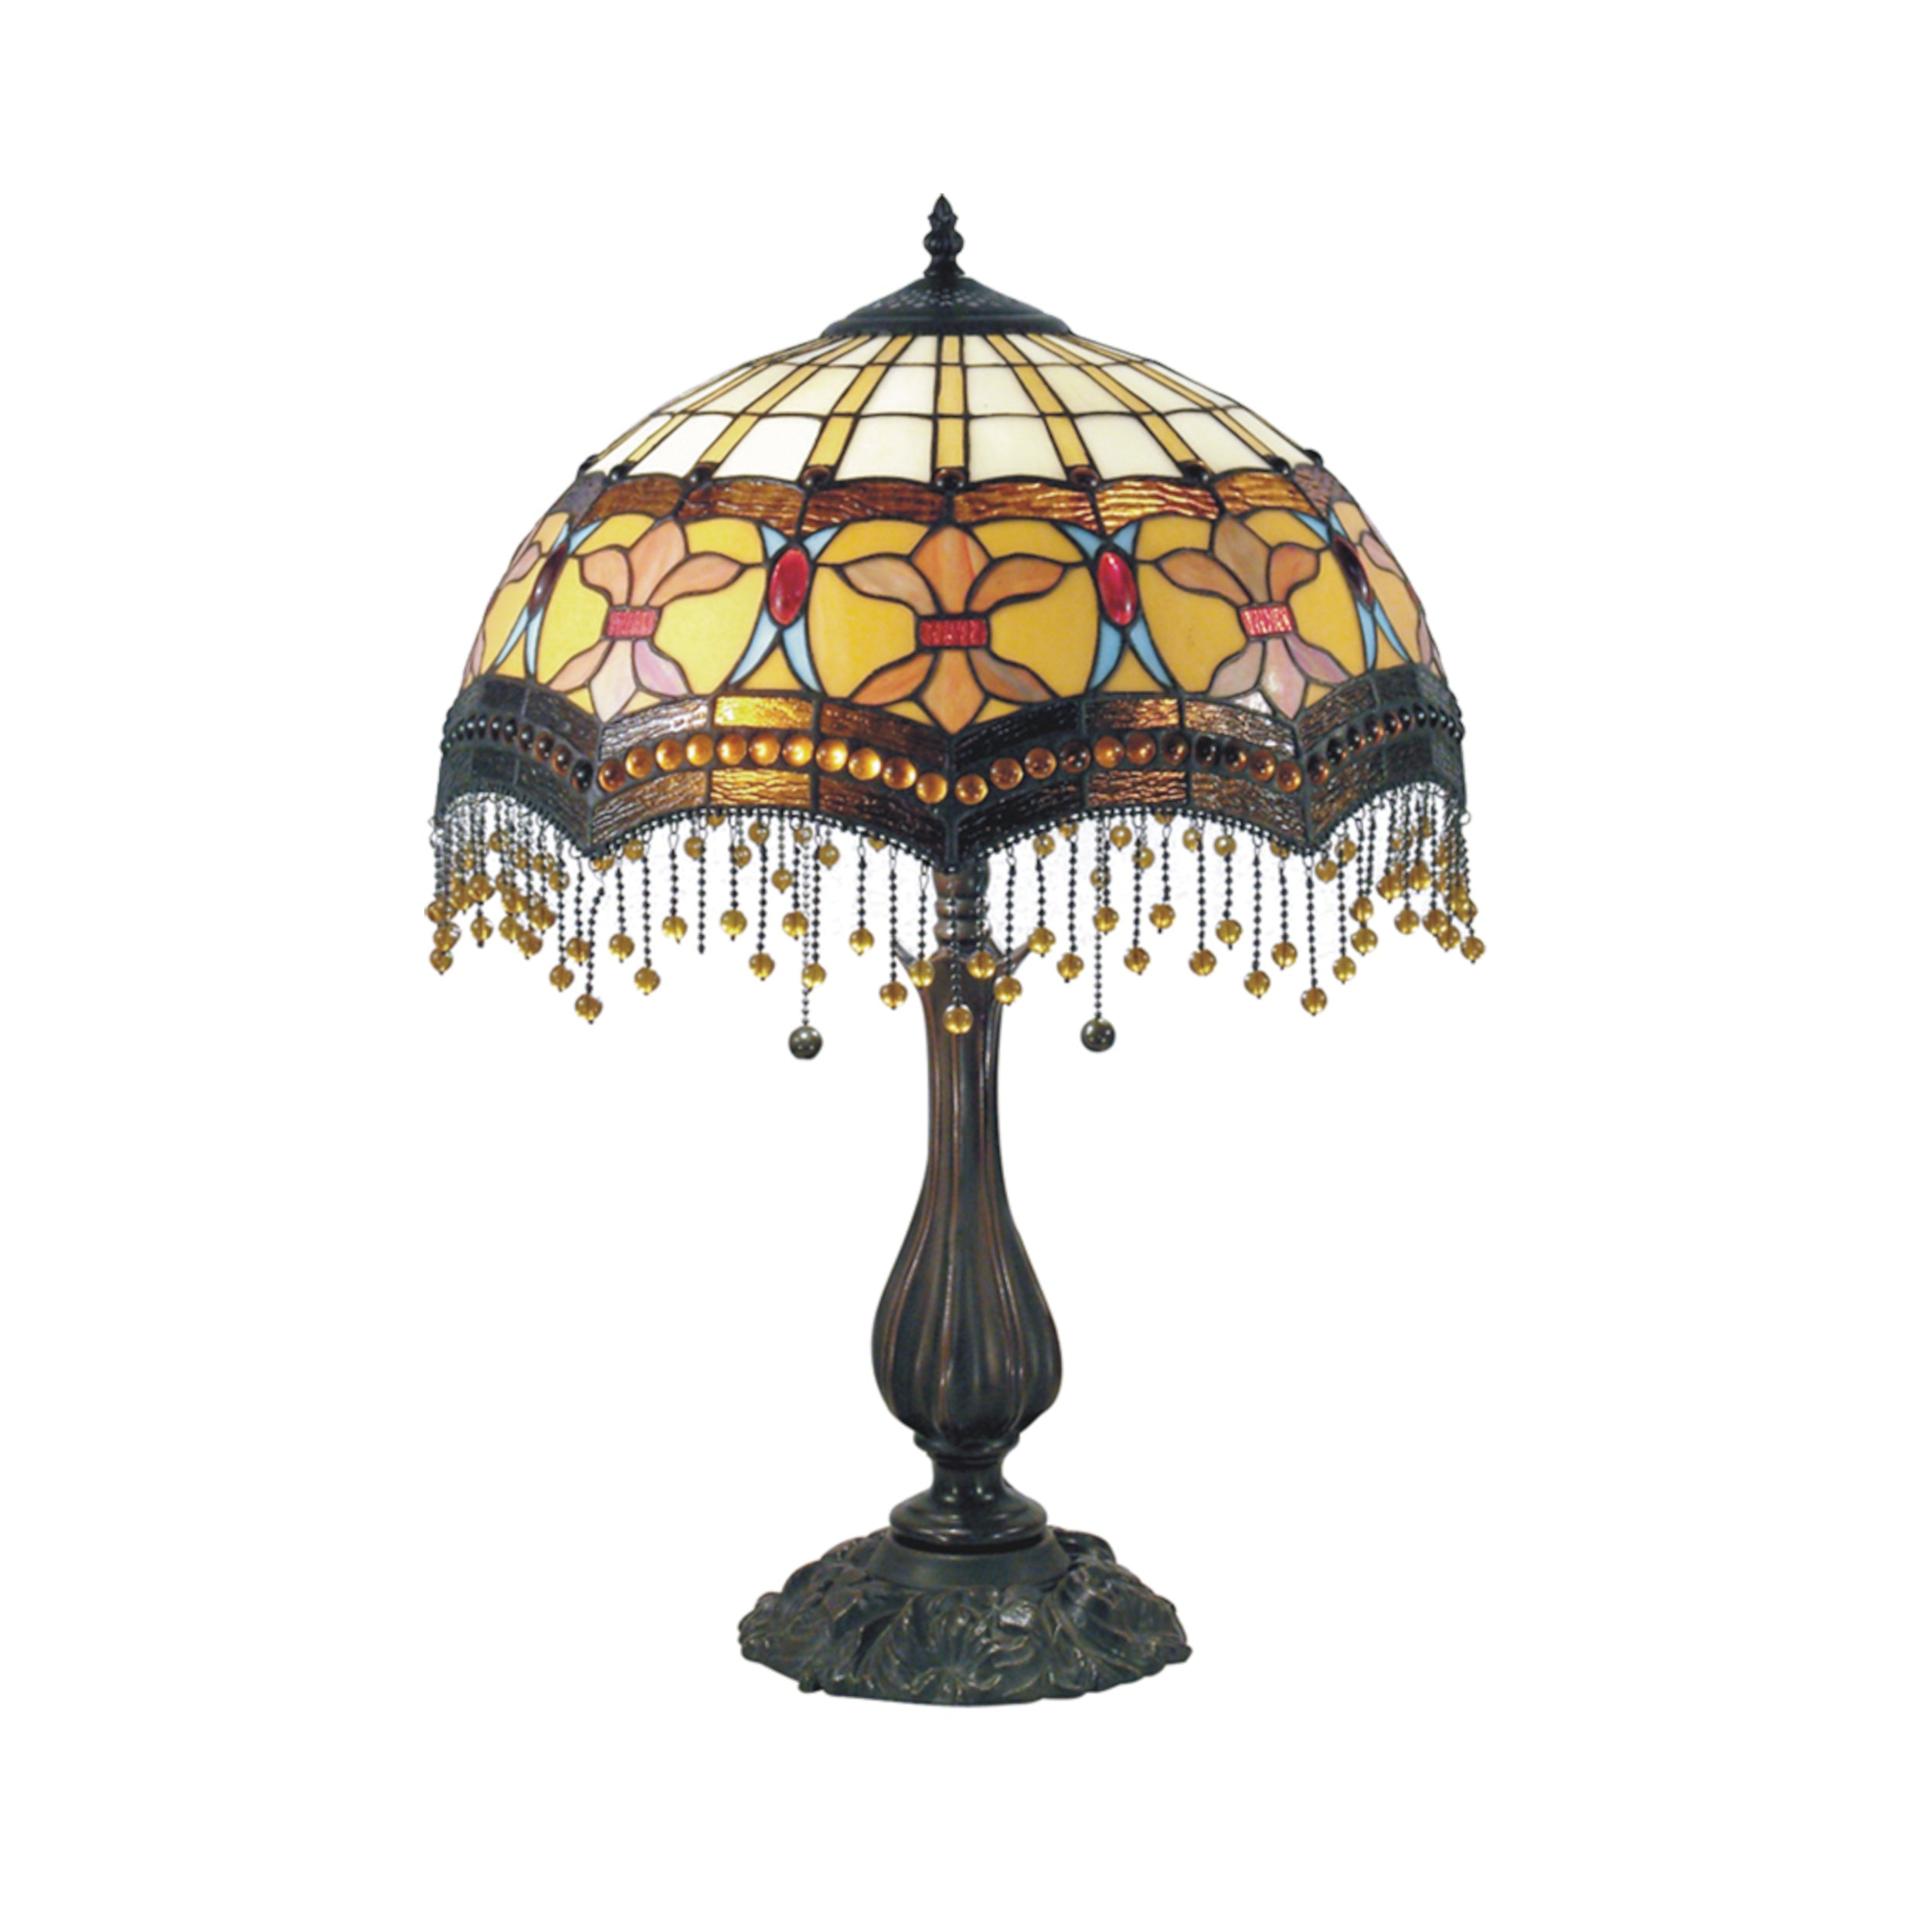 Tiffany Style "Madonna" Table Lamp